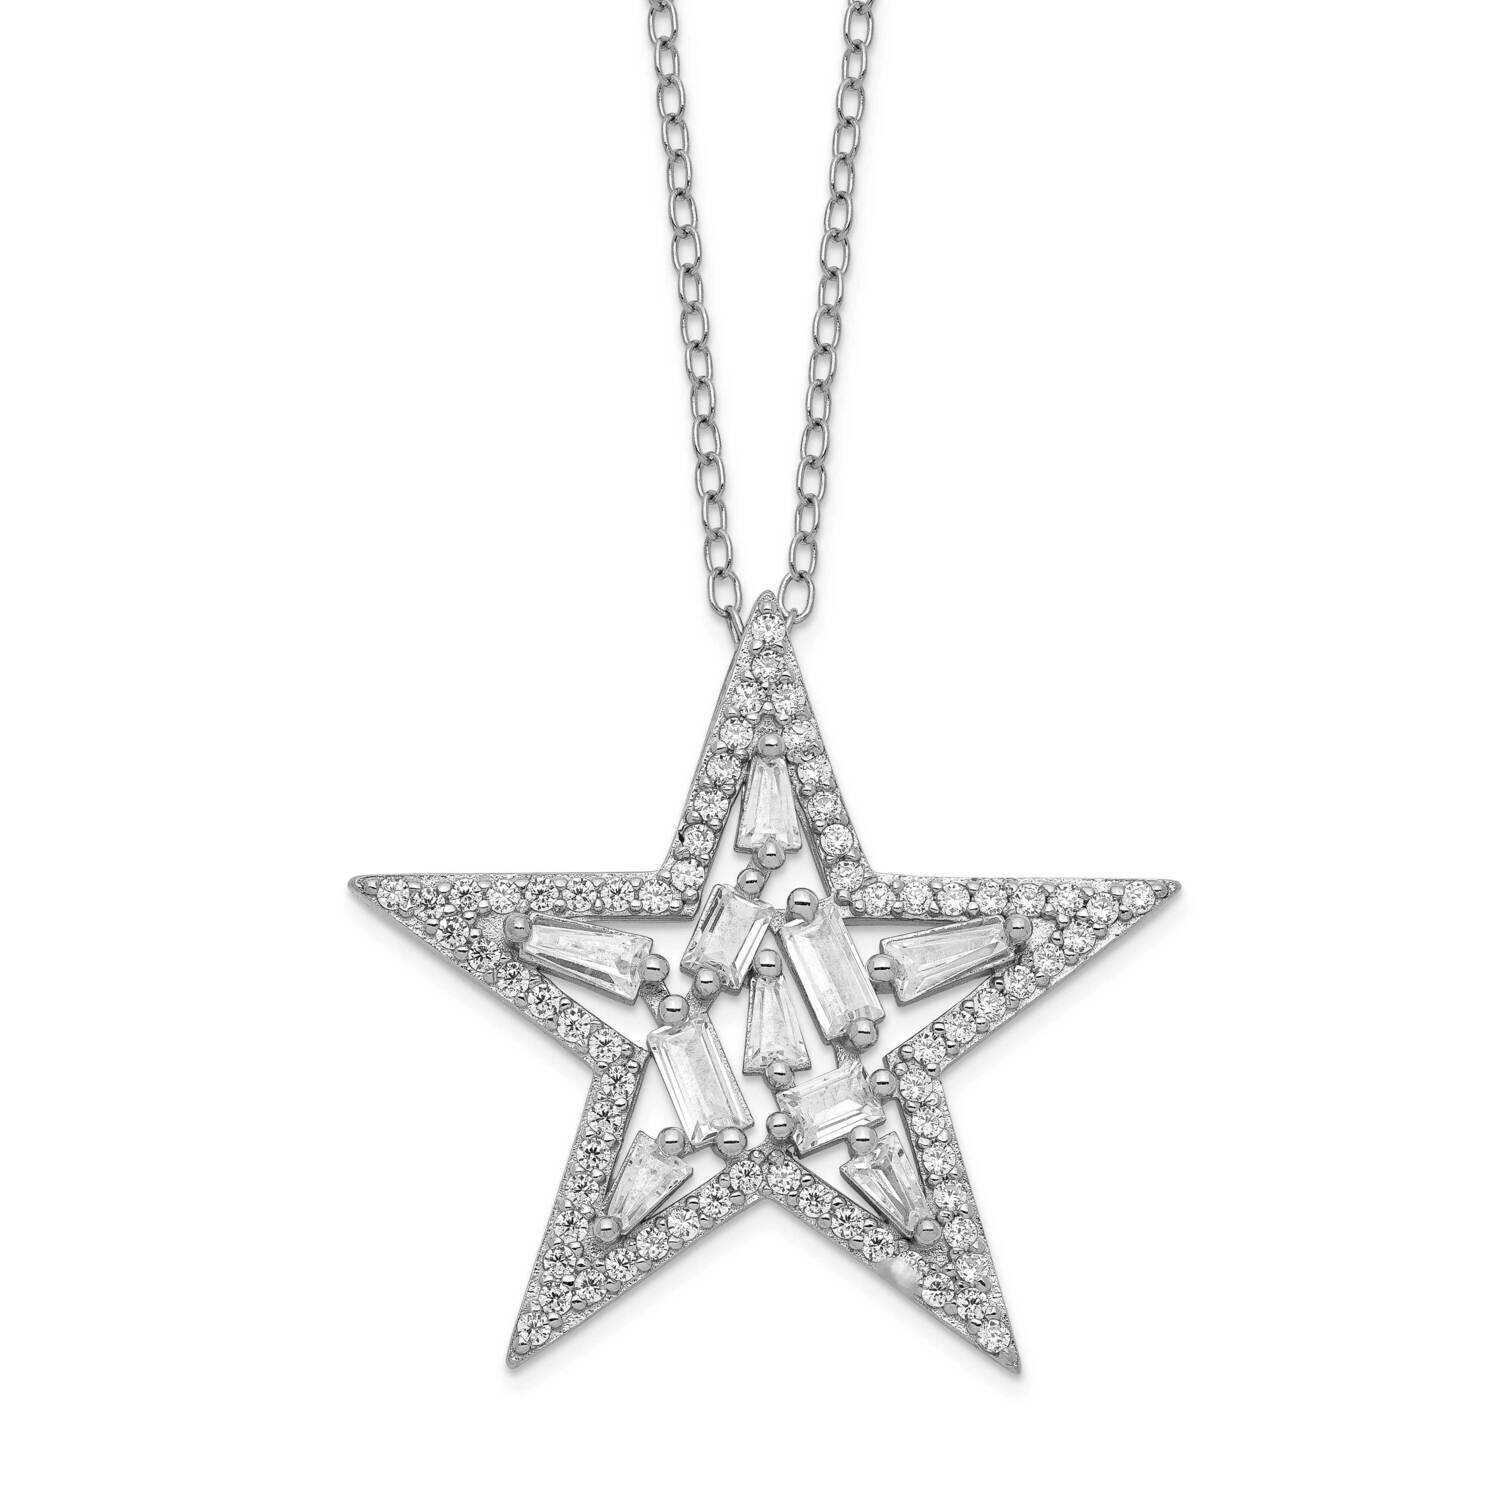 Cheryl M Cz Cluster Star 18 Inch Necklace Sterling Silver Rhodium-plated QCM1423-18